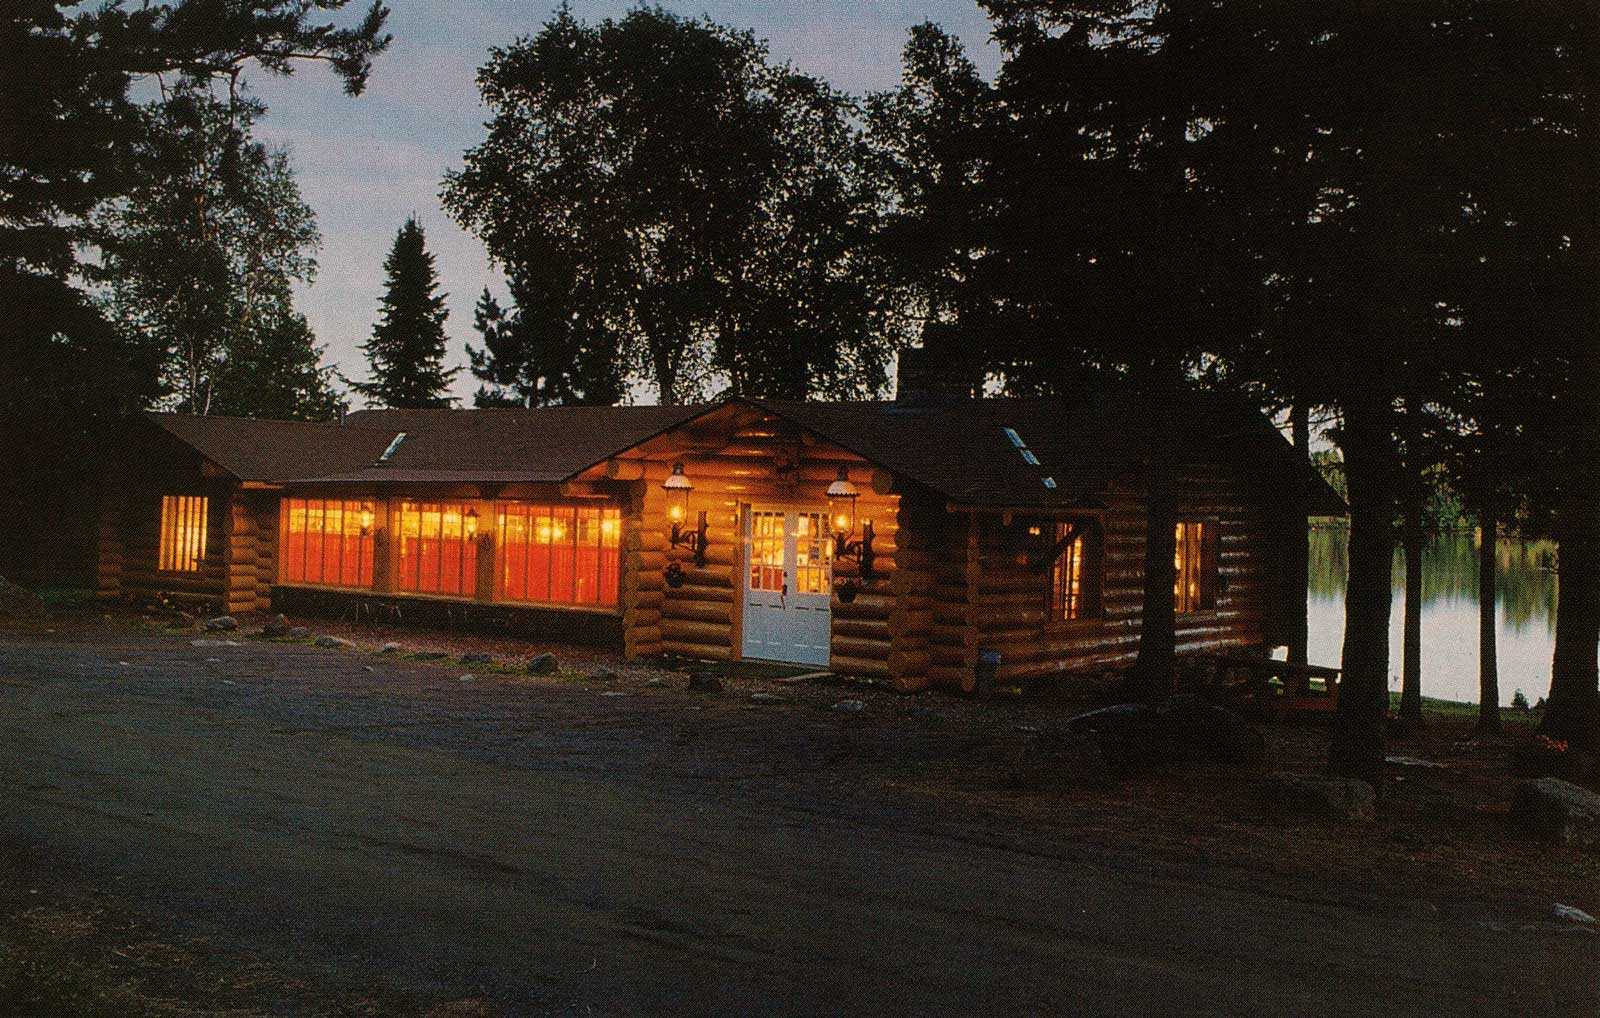 Rockwood Lodge 1997 - people came from far and wide to enjoy Fine Dining on the Gunflint Trail